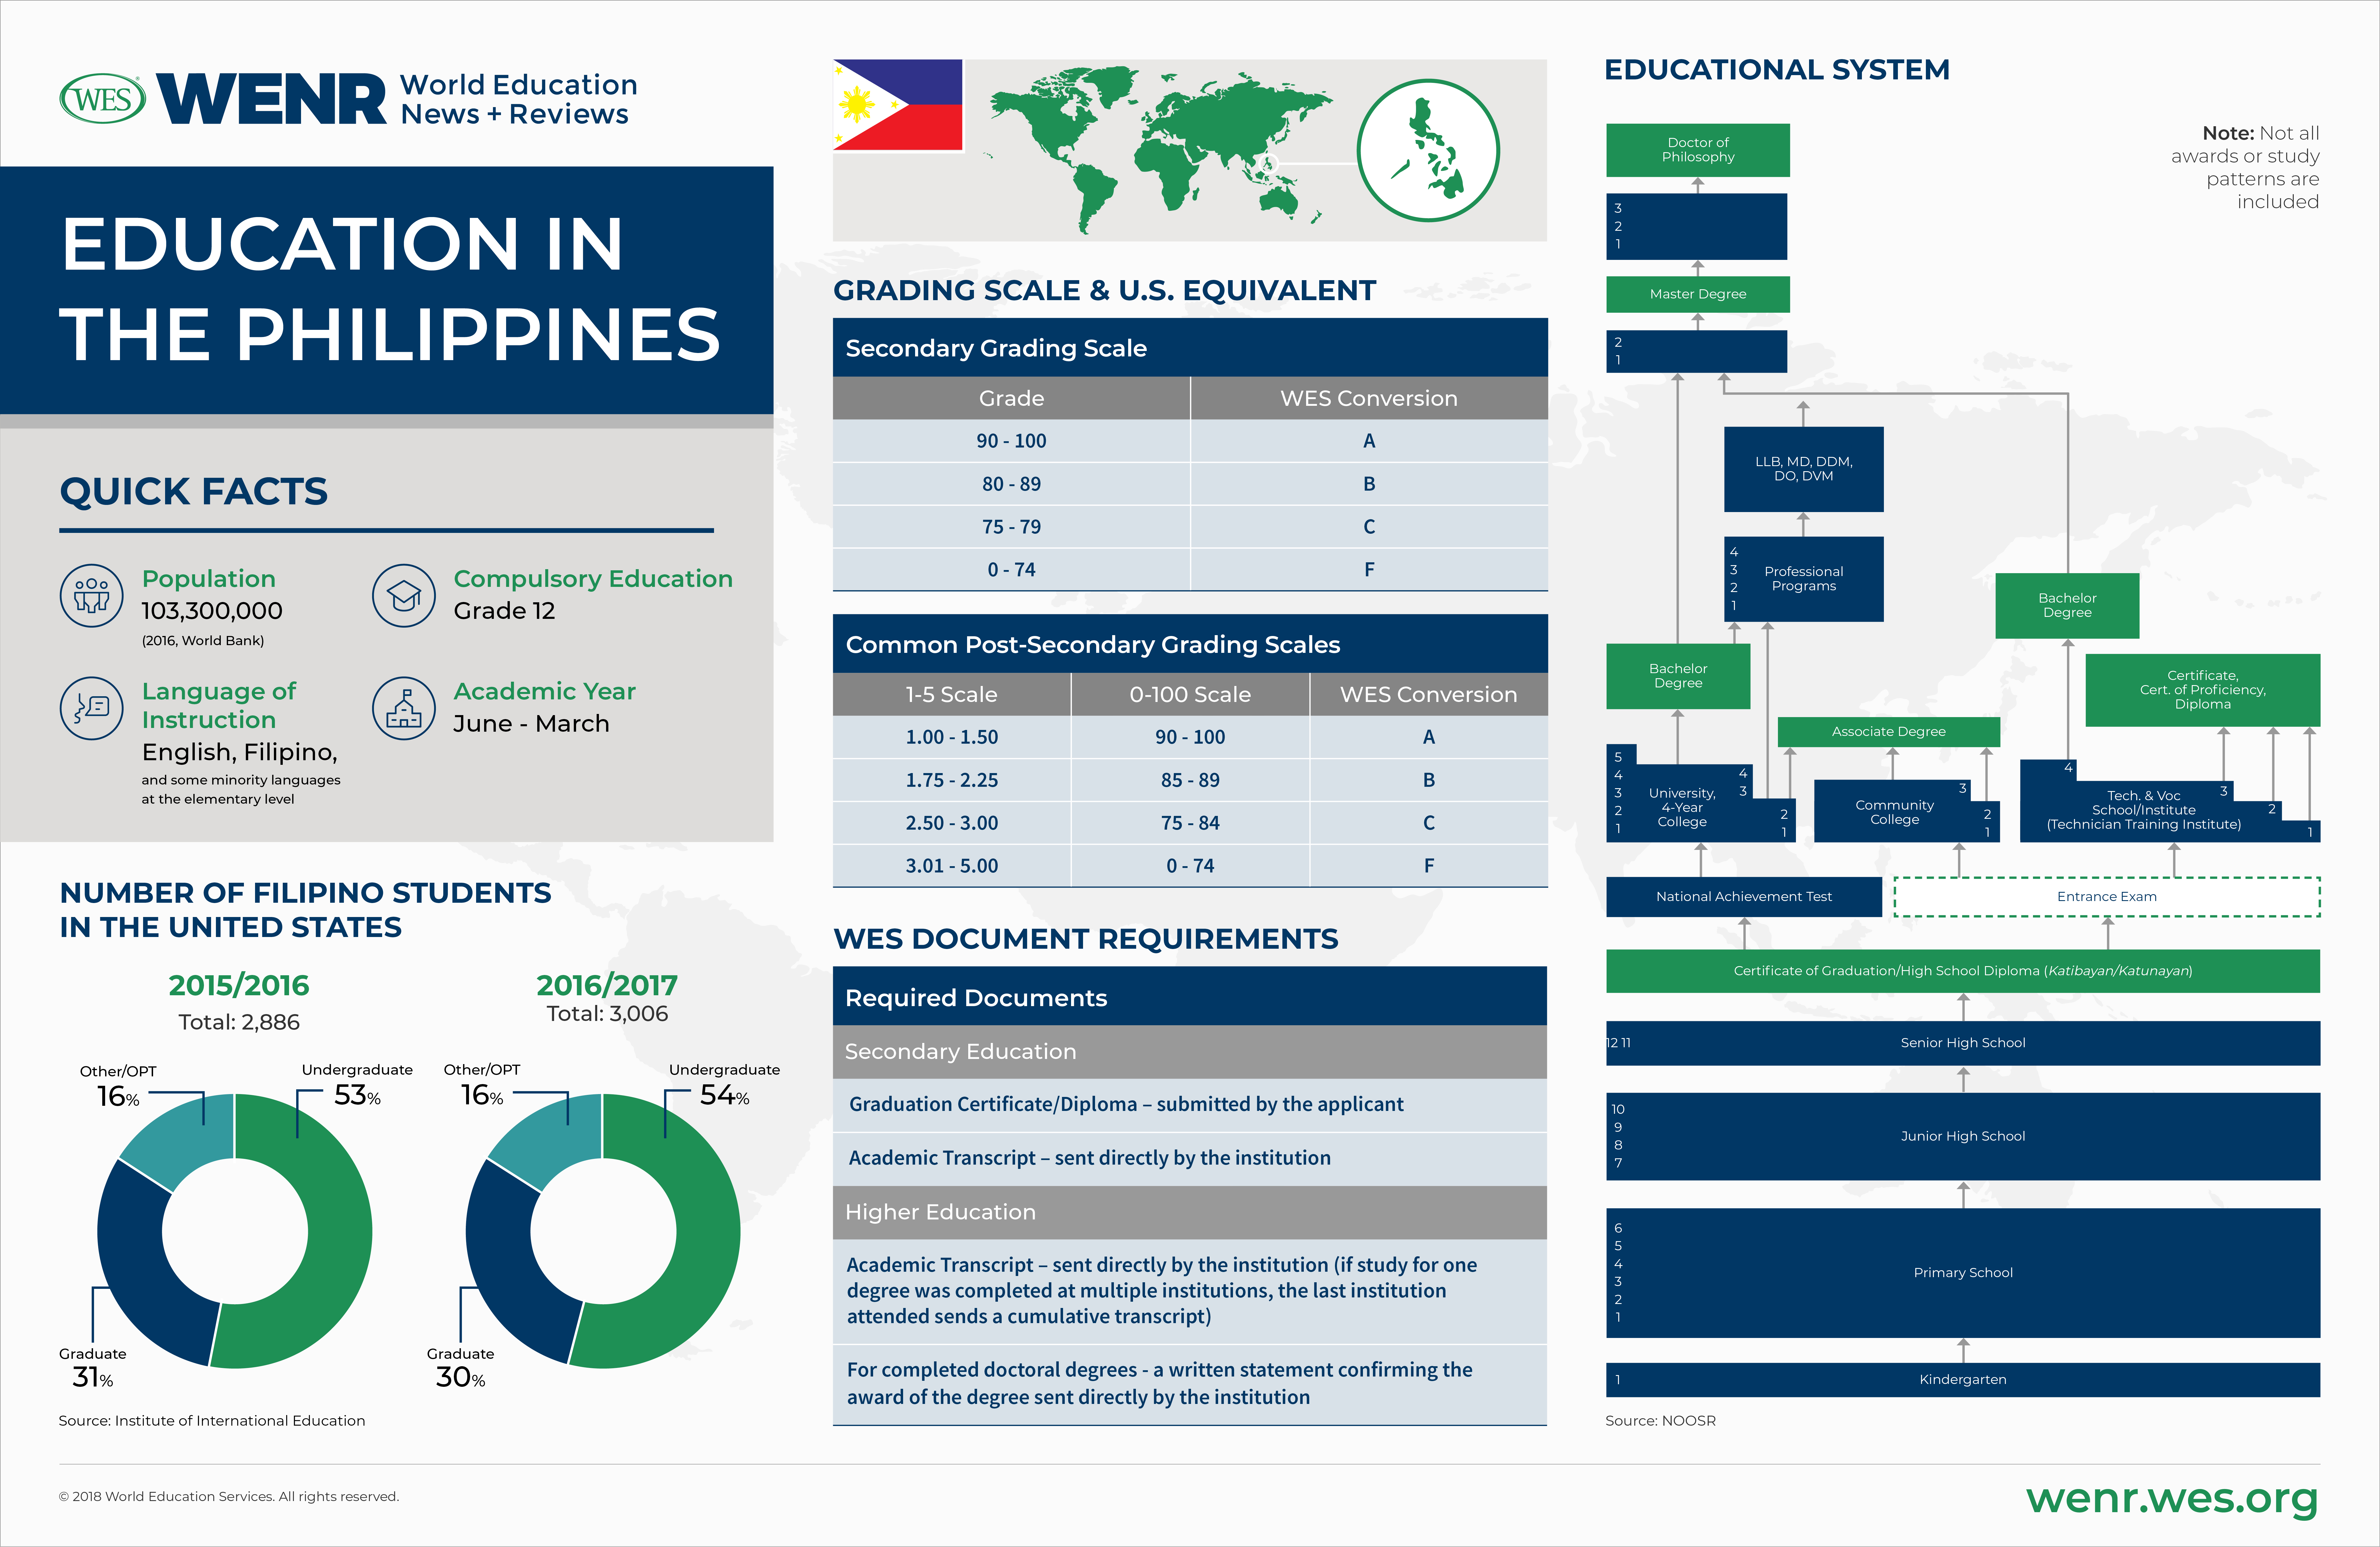 An infographic with fast facts on the Philippine's educational system and international student mobility landscape. 